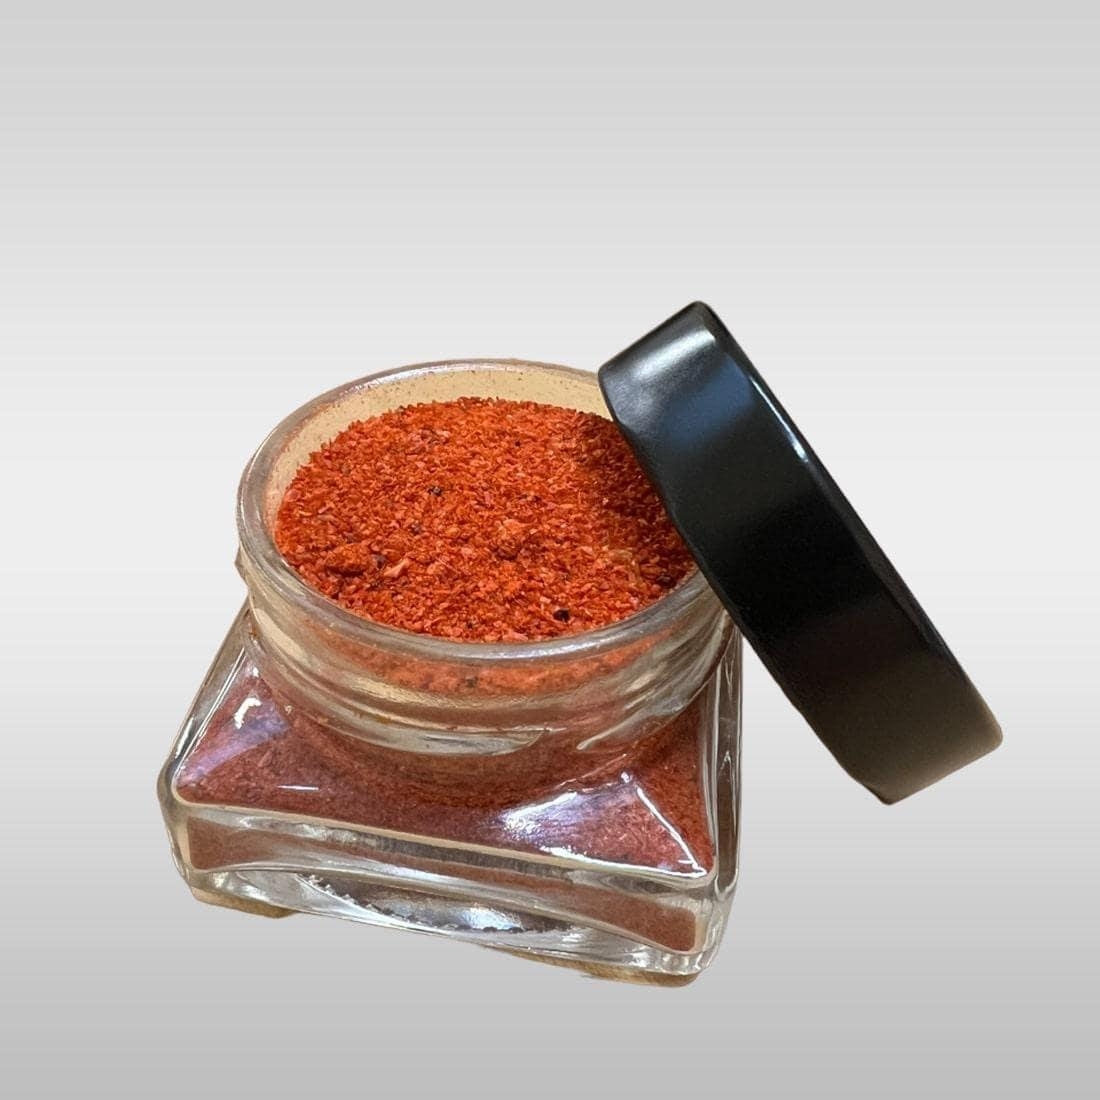 Abisso: Red King Prawn powder - Cover Image